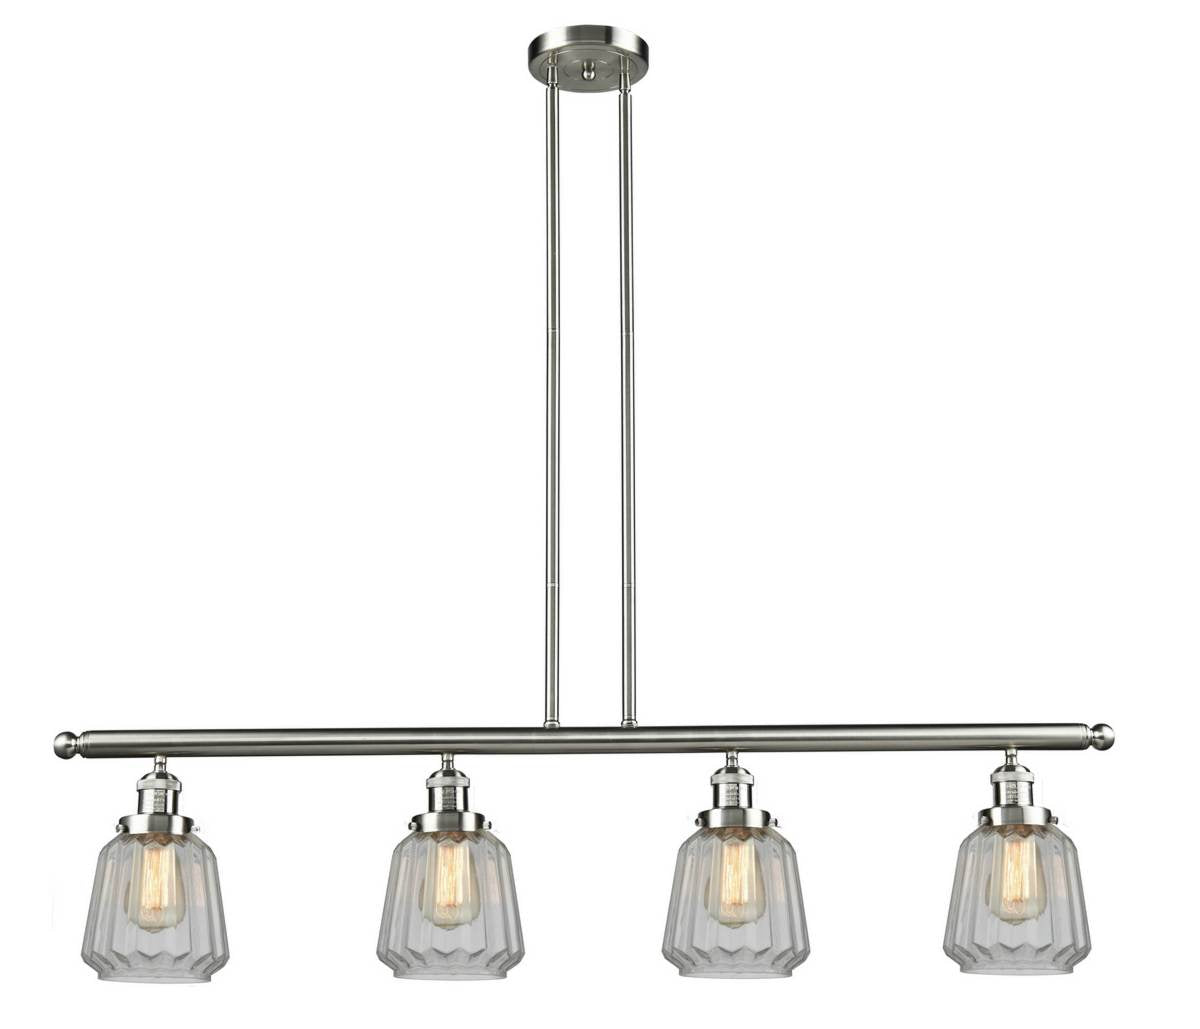 214-SN-G142 4-Light 50.875" Brushed Satin Nickel Island Light - Clear Chatham Glass - LED Bulb - Dimmensions: 50.875 x 6.25 x 10<br>Minimum Height : 21<br>Maximum Height : 45 - Sloped Ceiling Compatible: Yes